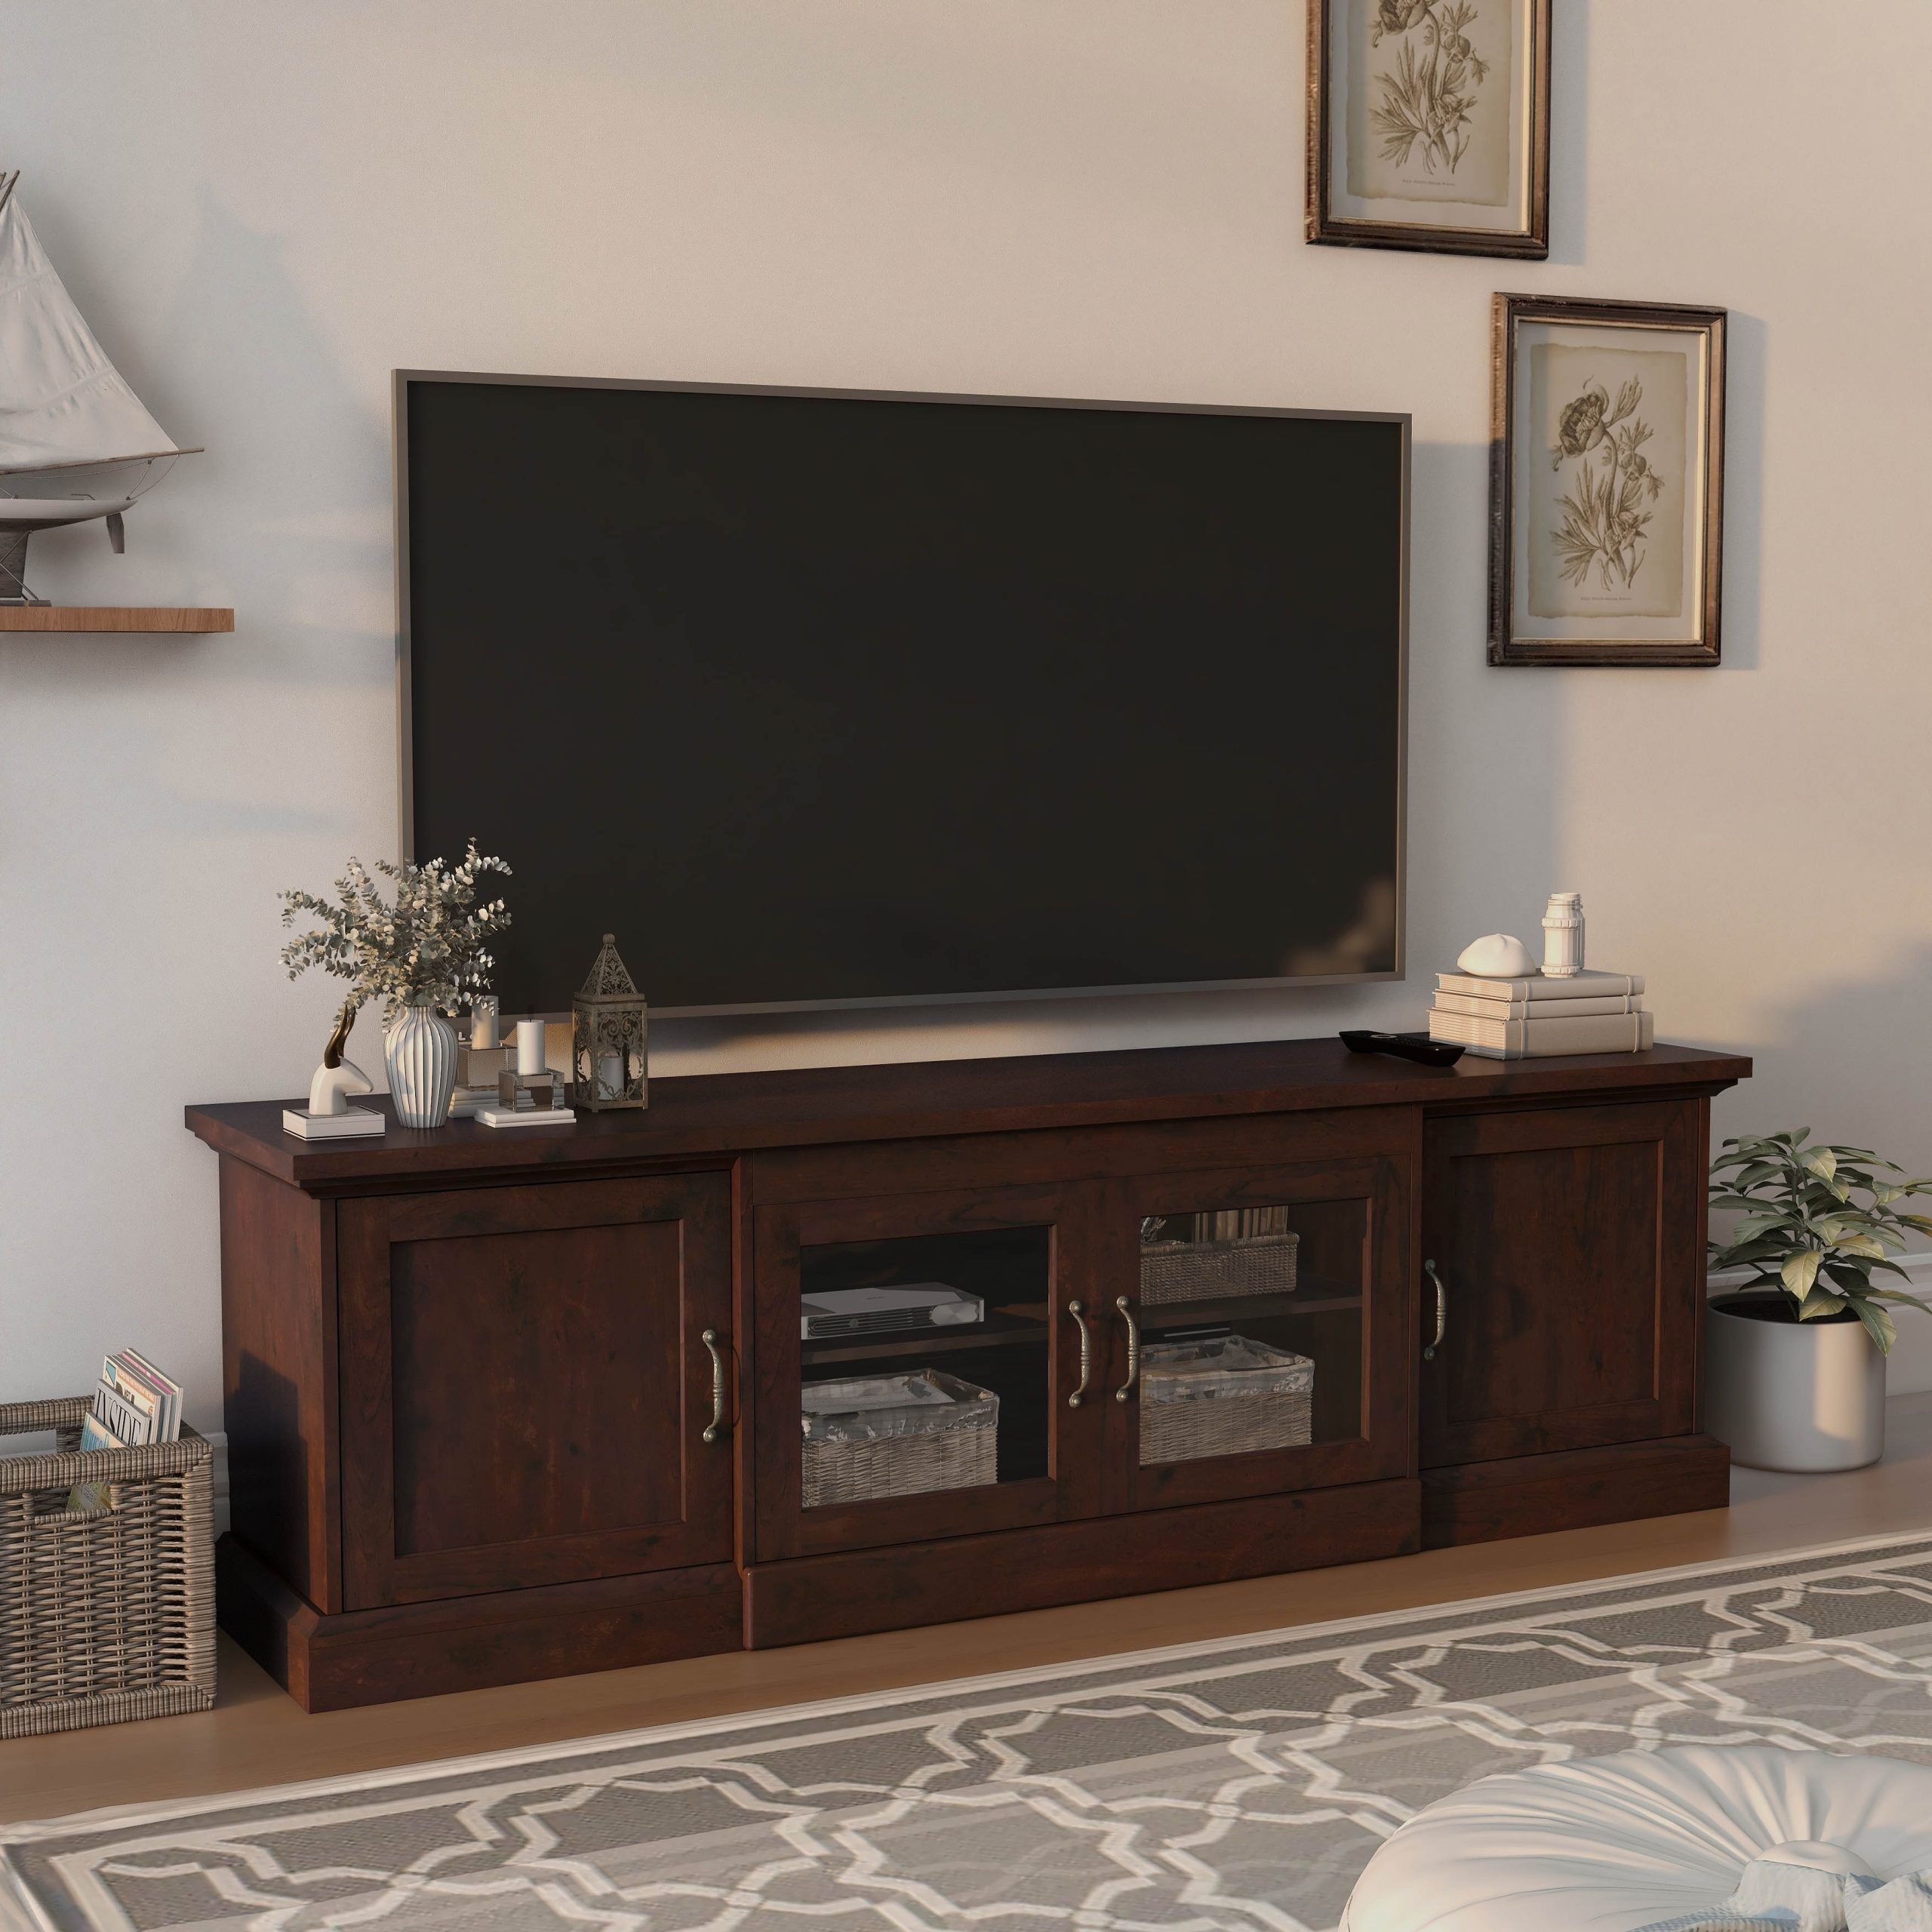 Dh Basic Timeless 68" Wide Walnut Entertainment Centerdenhour – On Sale  – Bed Bath & Beyond – 35205144 Intended For Wide Entertainment Centers (View 10 of 15)